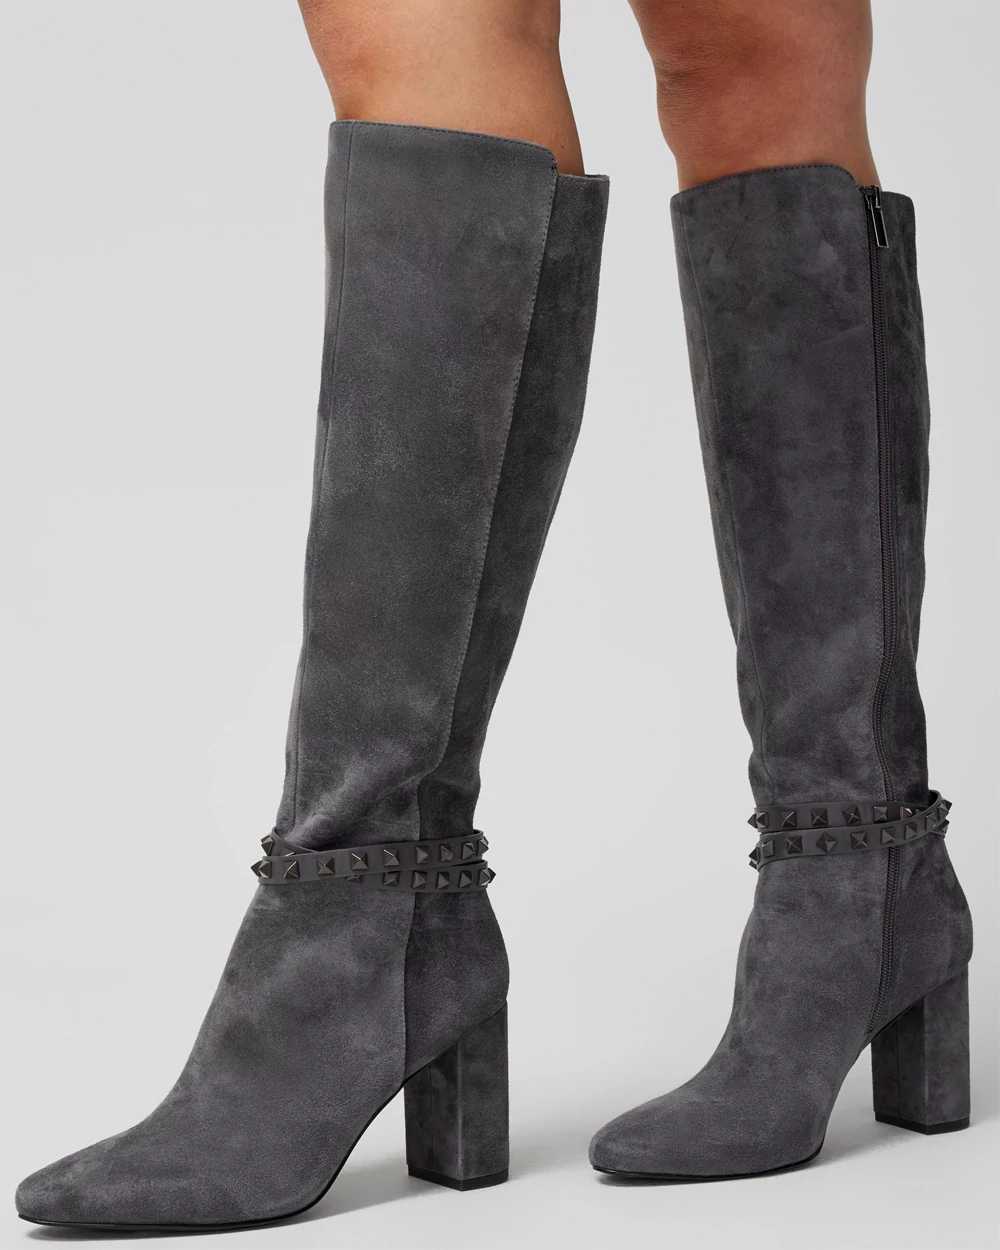 Removable Stud Strap Boot